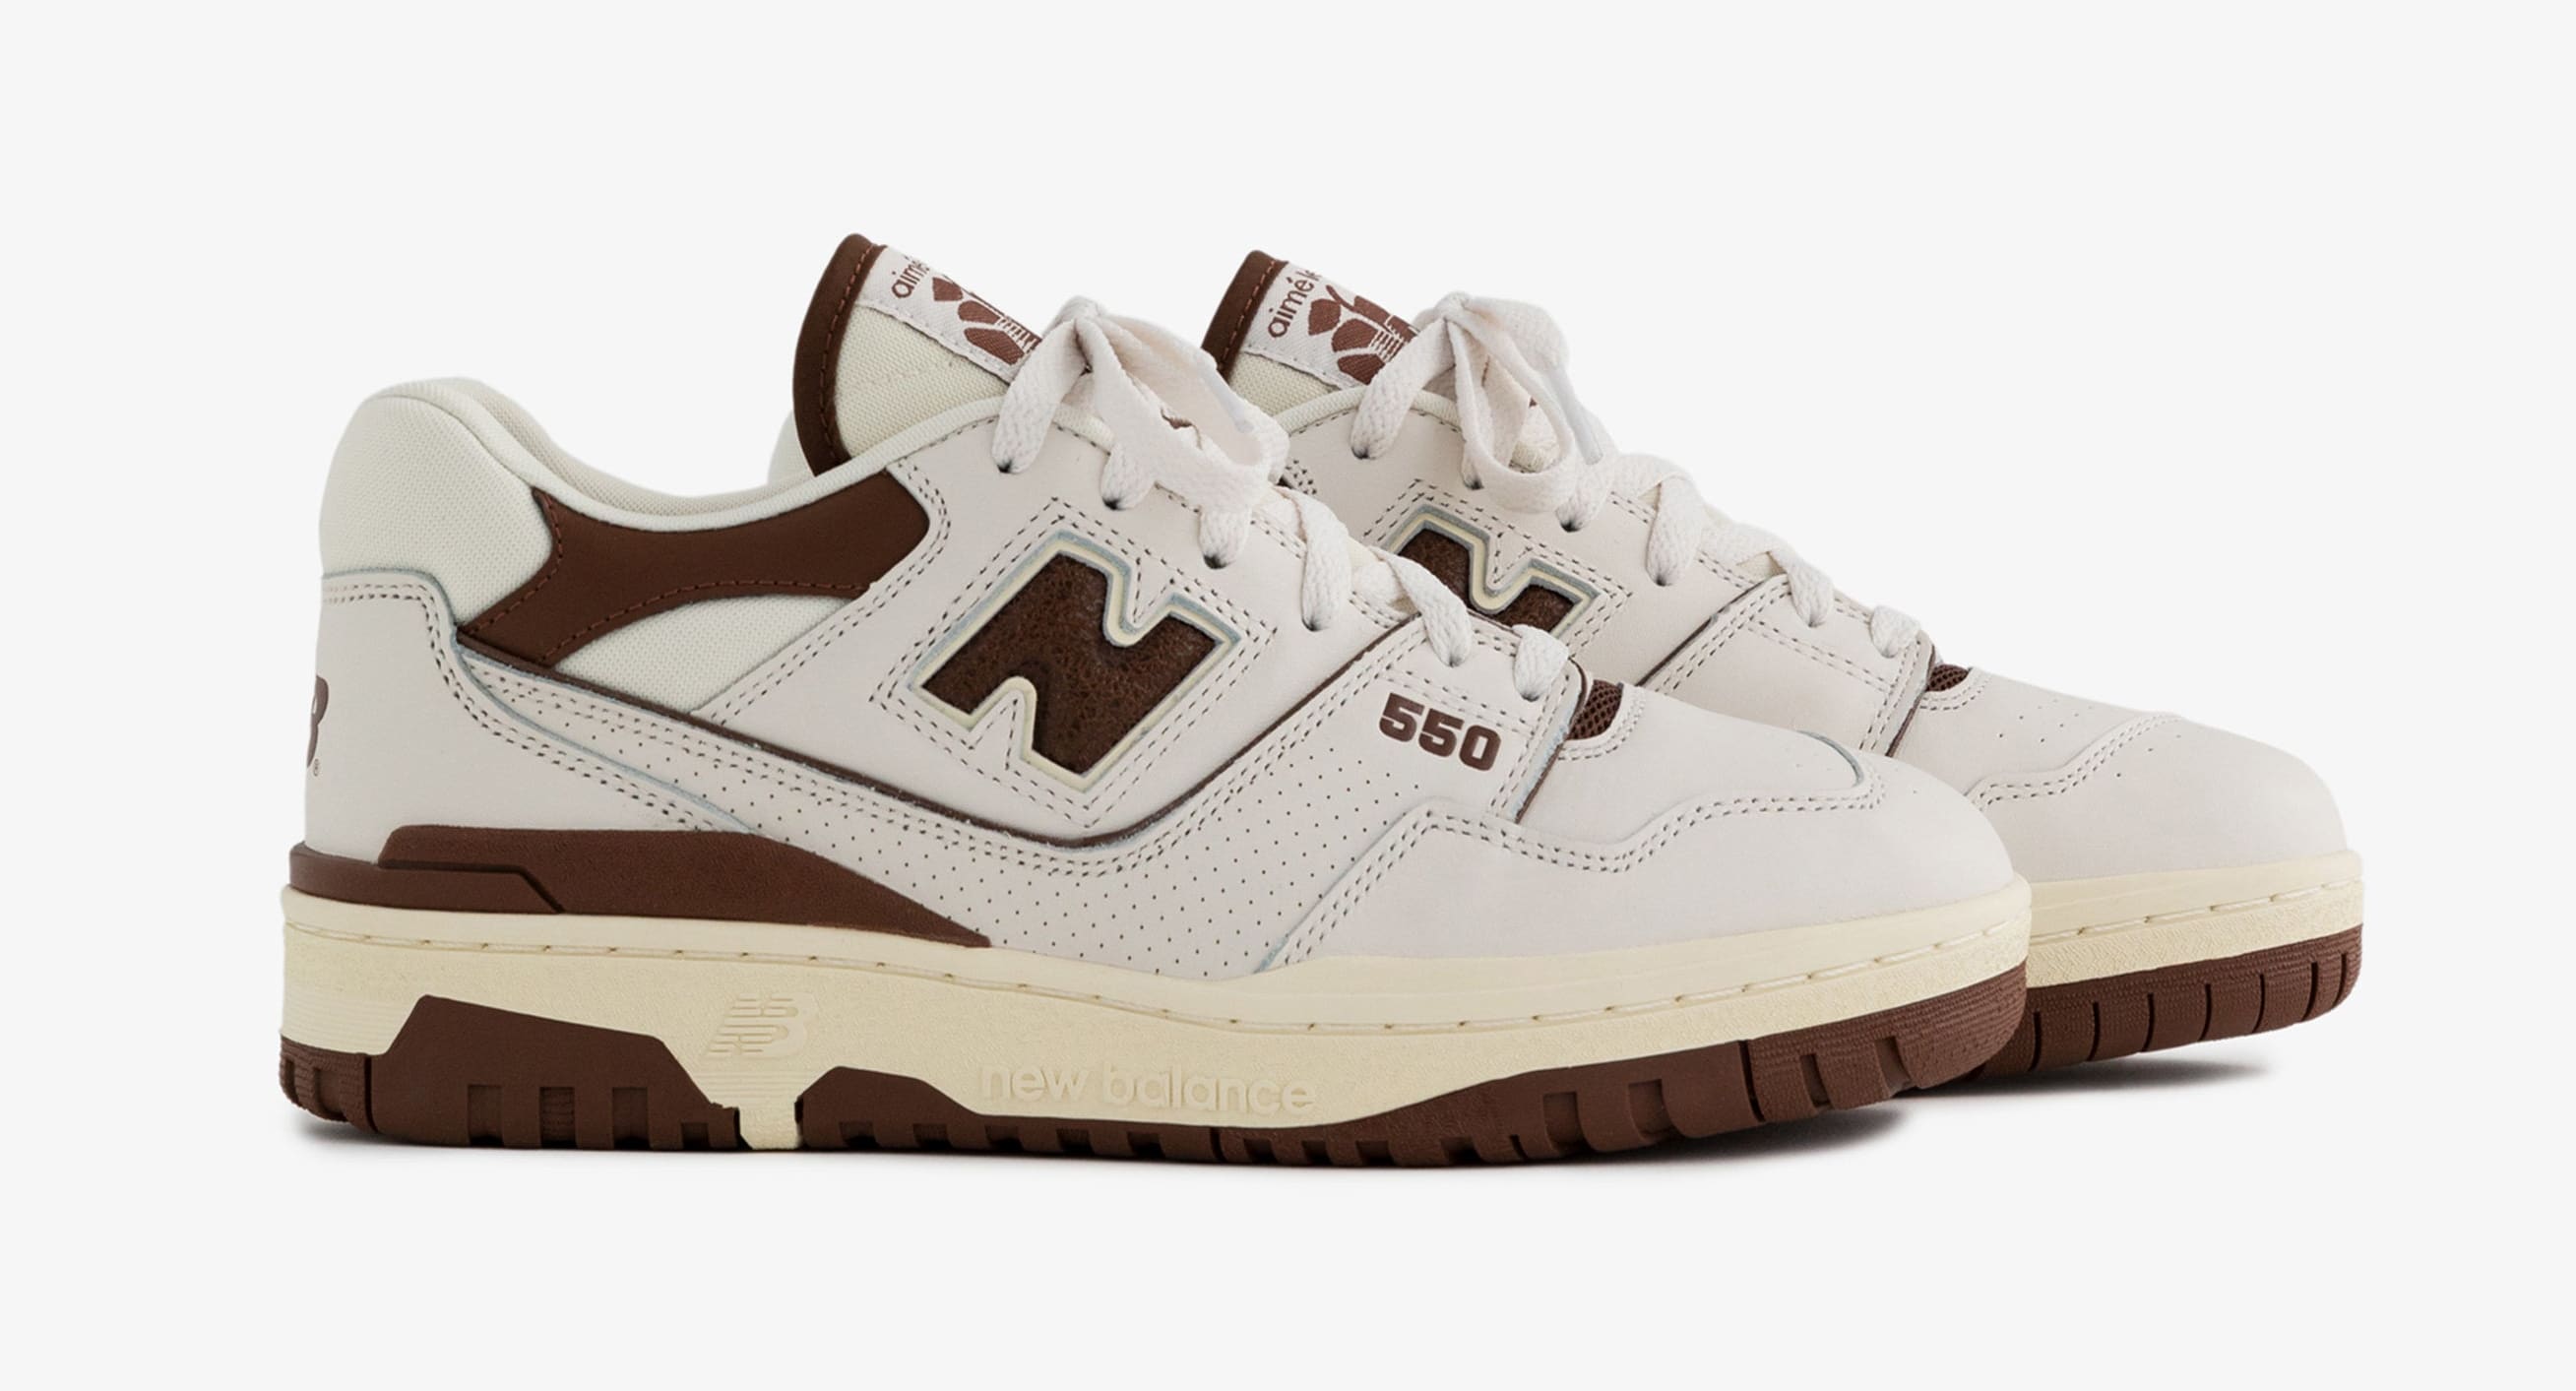 More Aimé Leon Dore x New Balance 550 Collabs Are Dropping Soon